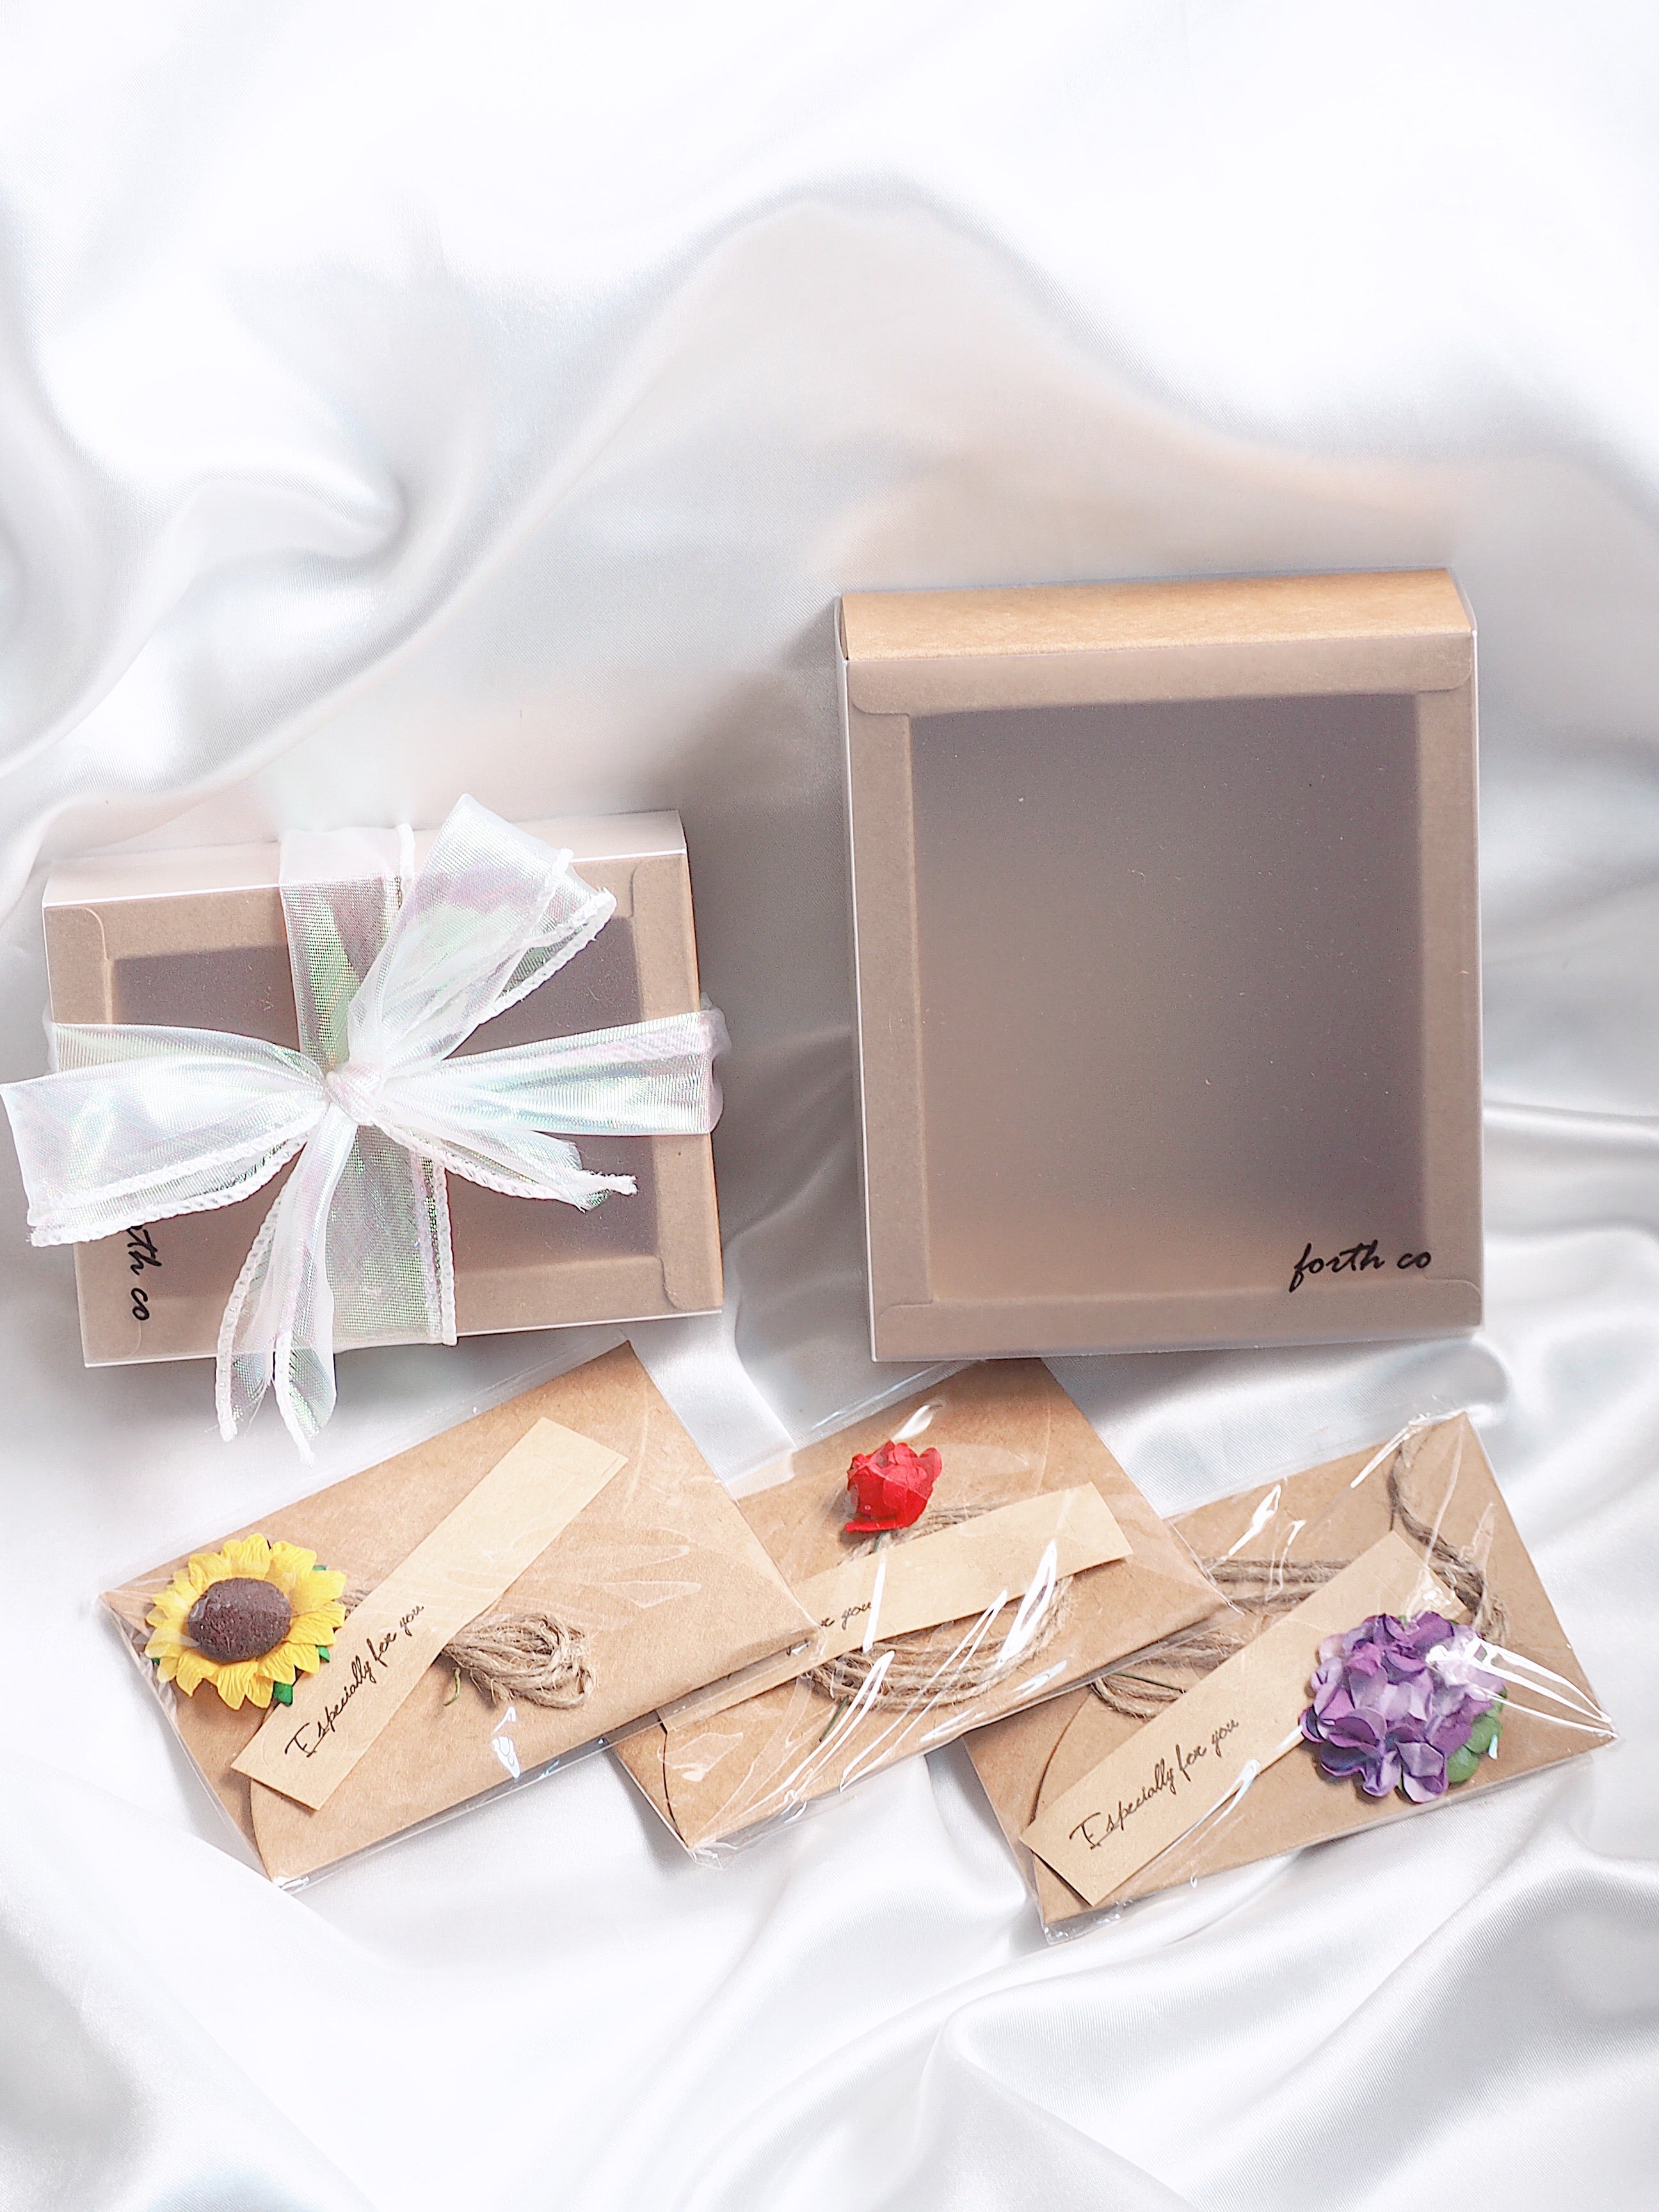 Add-on: Gift Box with card